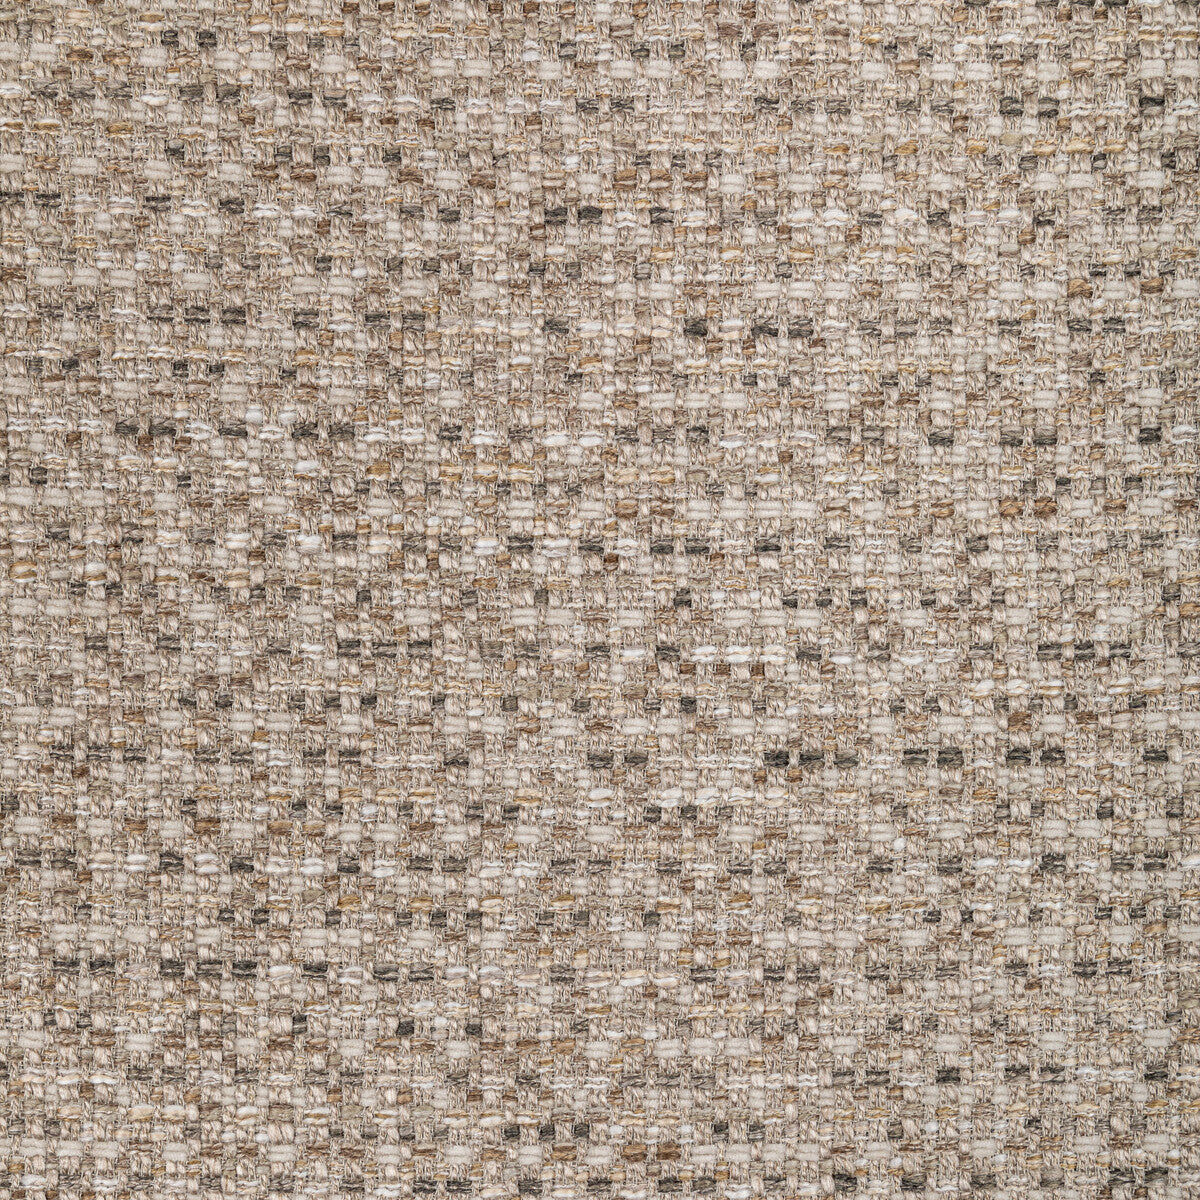 Remo fabric in fossil color - pattern 36324.1161.0 - by Kravet Contract